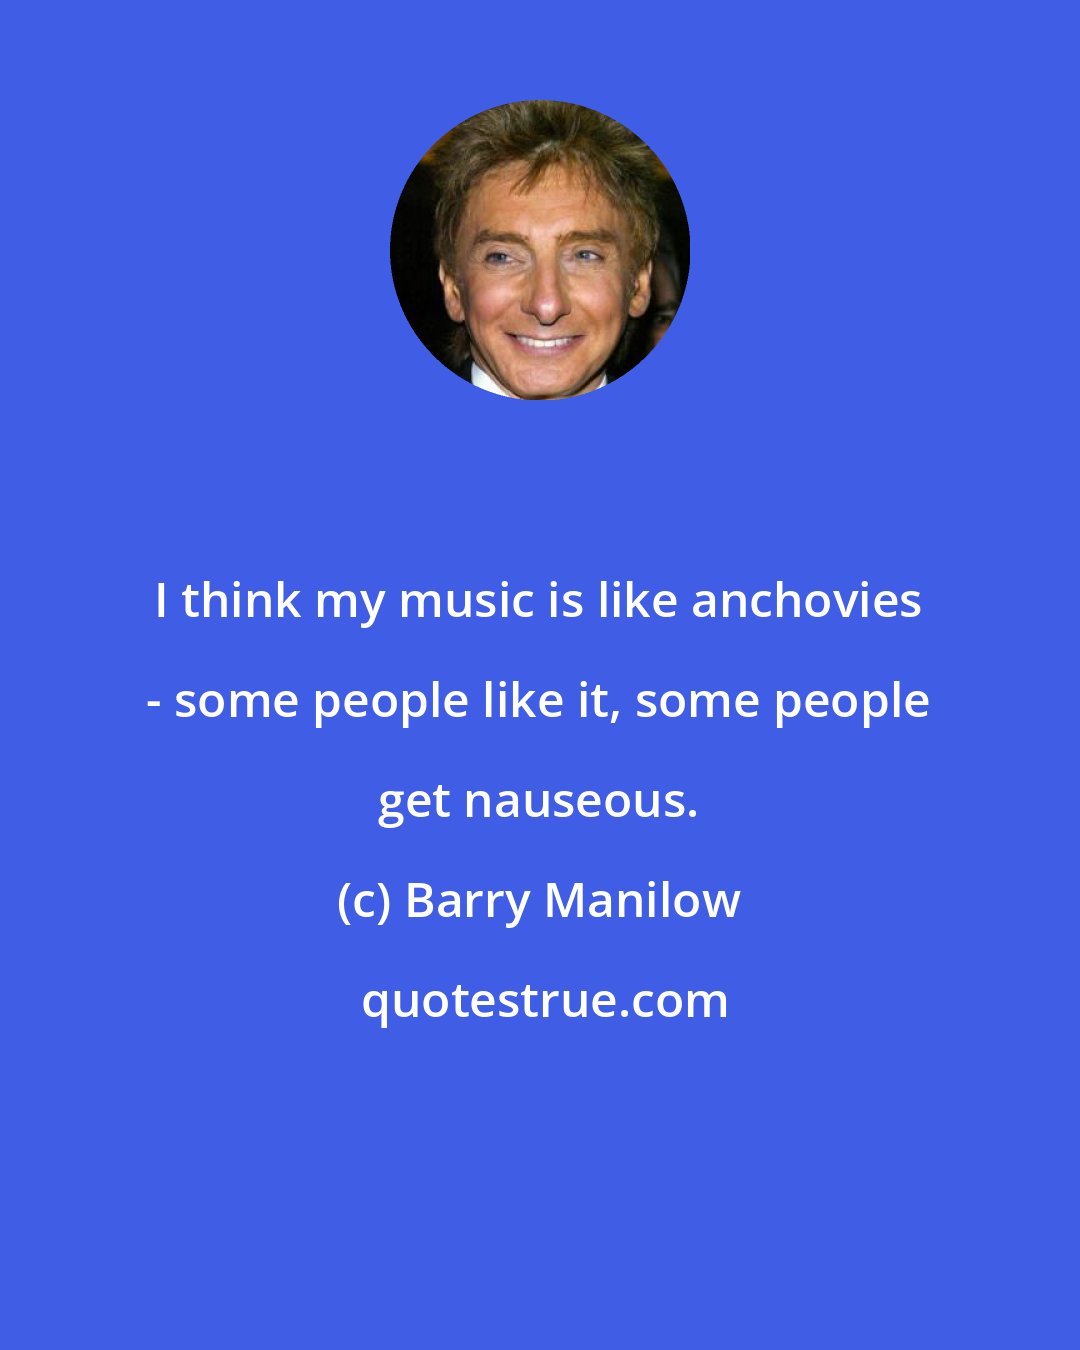 Barry Manilow: I think my music is like anchovies - some people like it, some people get nauseous.